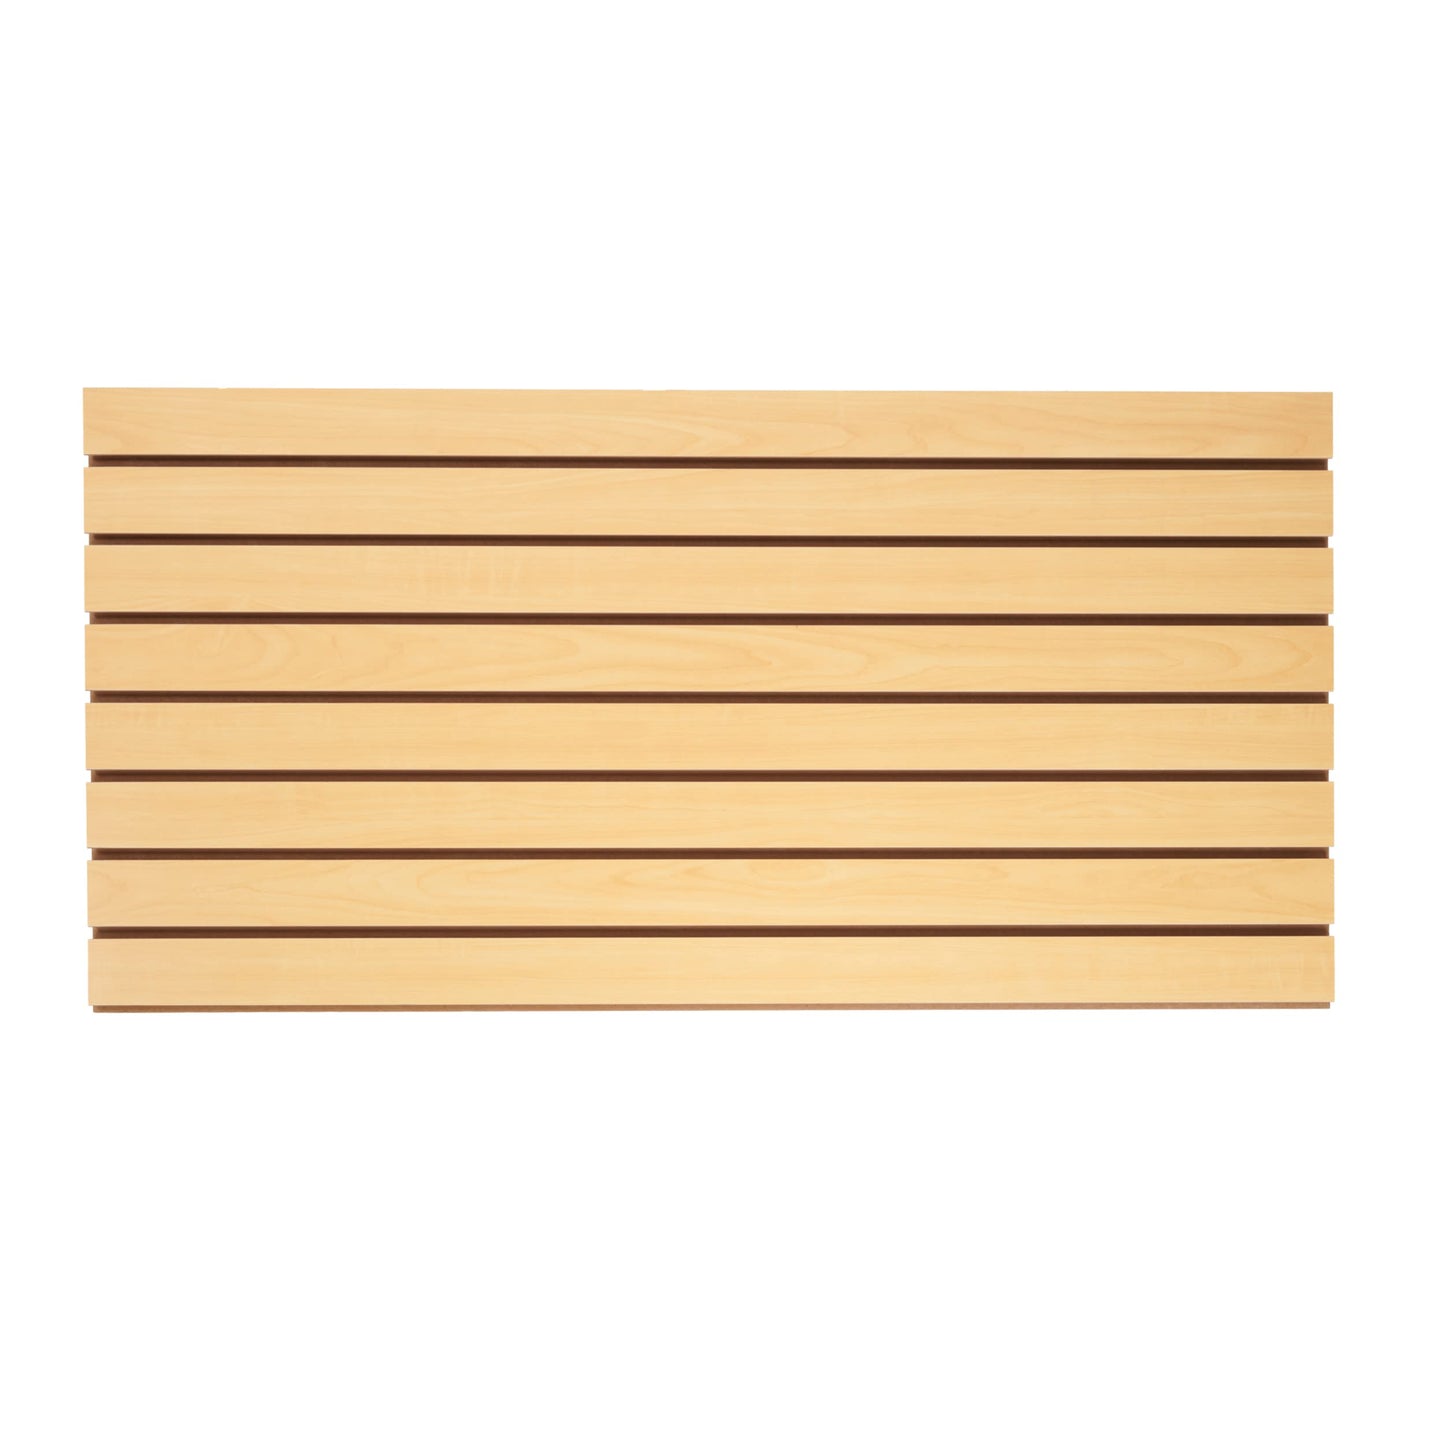 SSWBasics 4 ft x 2 ft Horizontal Maple Slatwall Easy Organizer Panels (24"H x 48"L) - Pack of 2 - Perfect for Retail Store, Garage Wall, and Craft